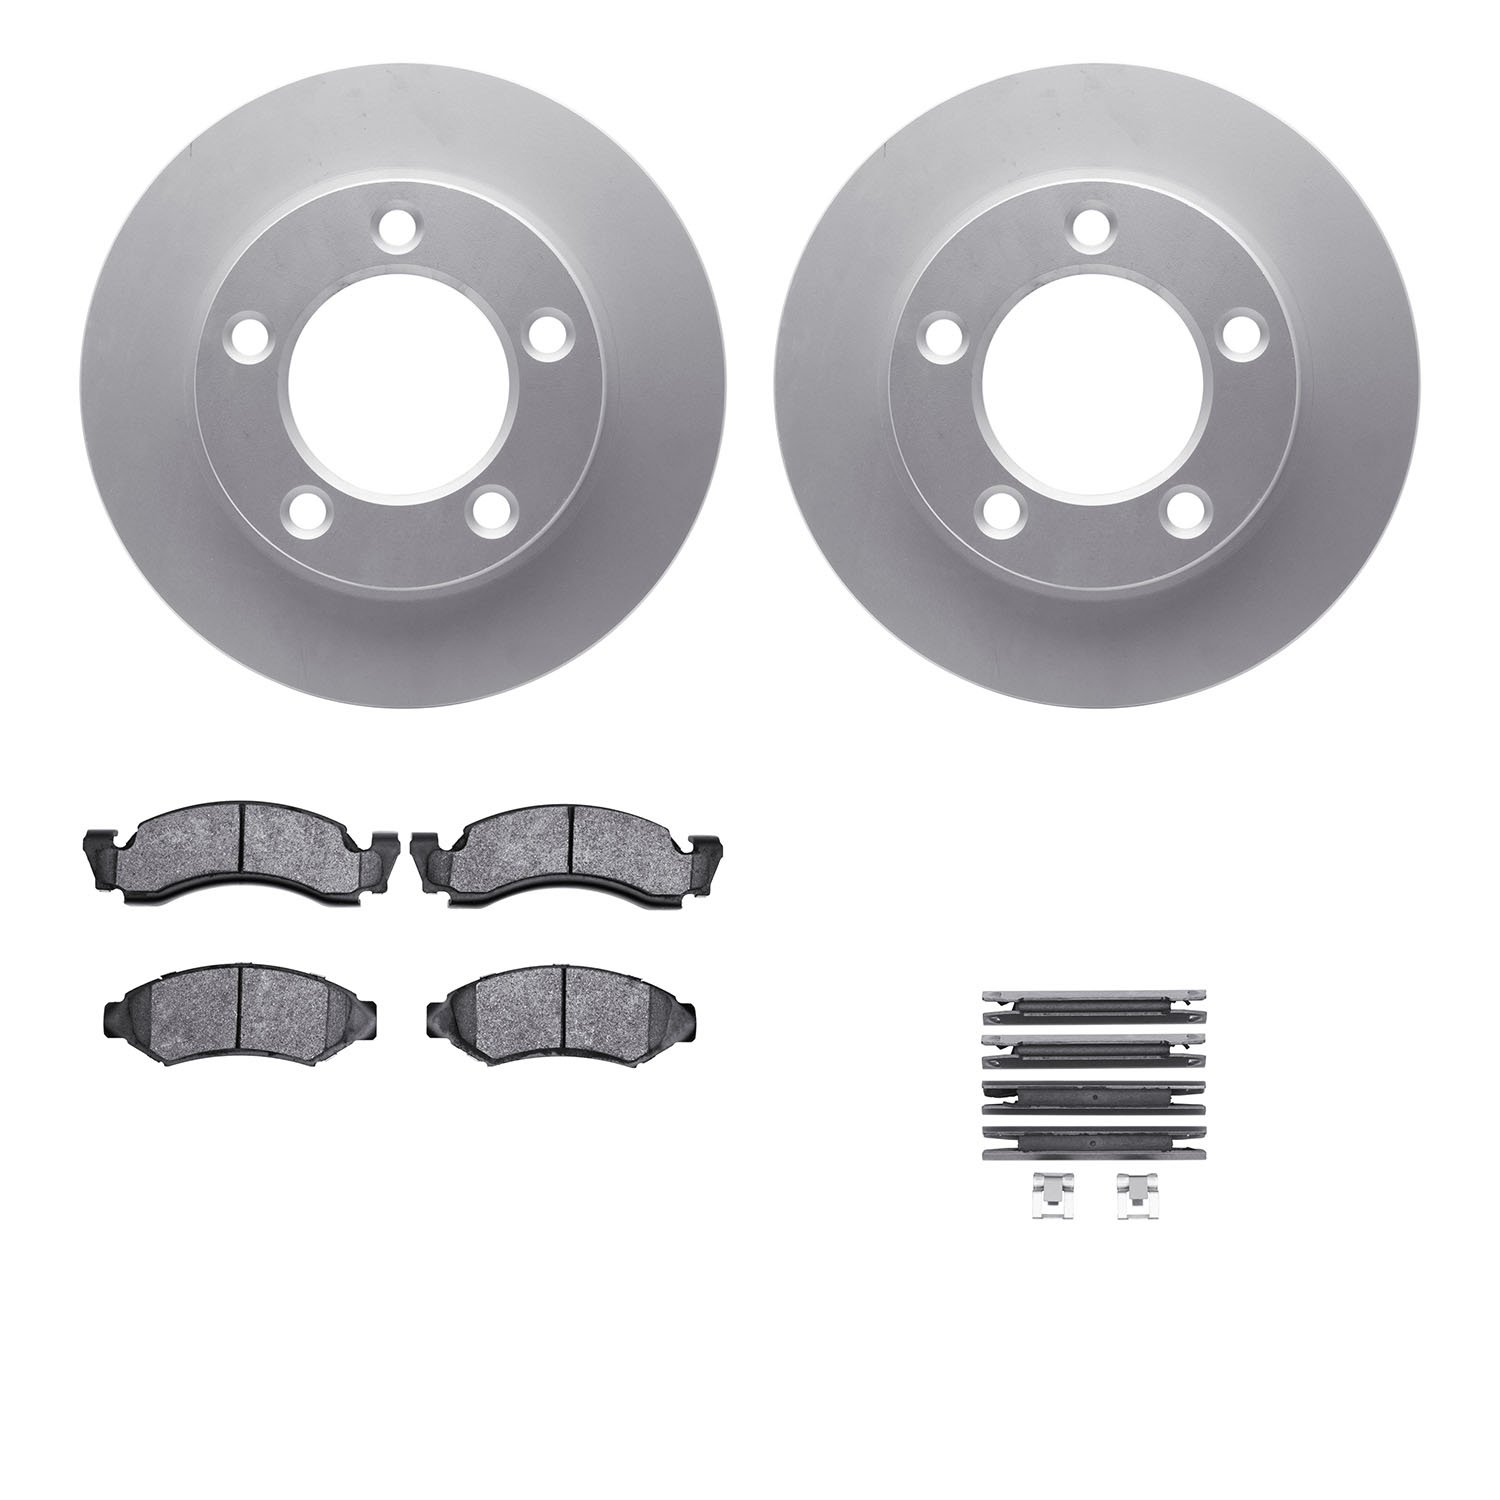 4412-54005 Geospec Brake Rotors with Ultimate-Duty Brake Pads & Hardware, 1986-1993 Ford/Lincoln/Mercury/Mazda, Position: Front